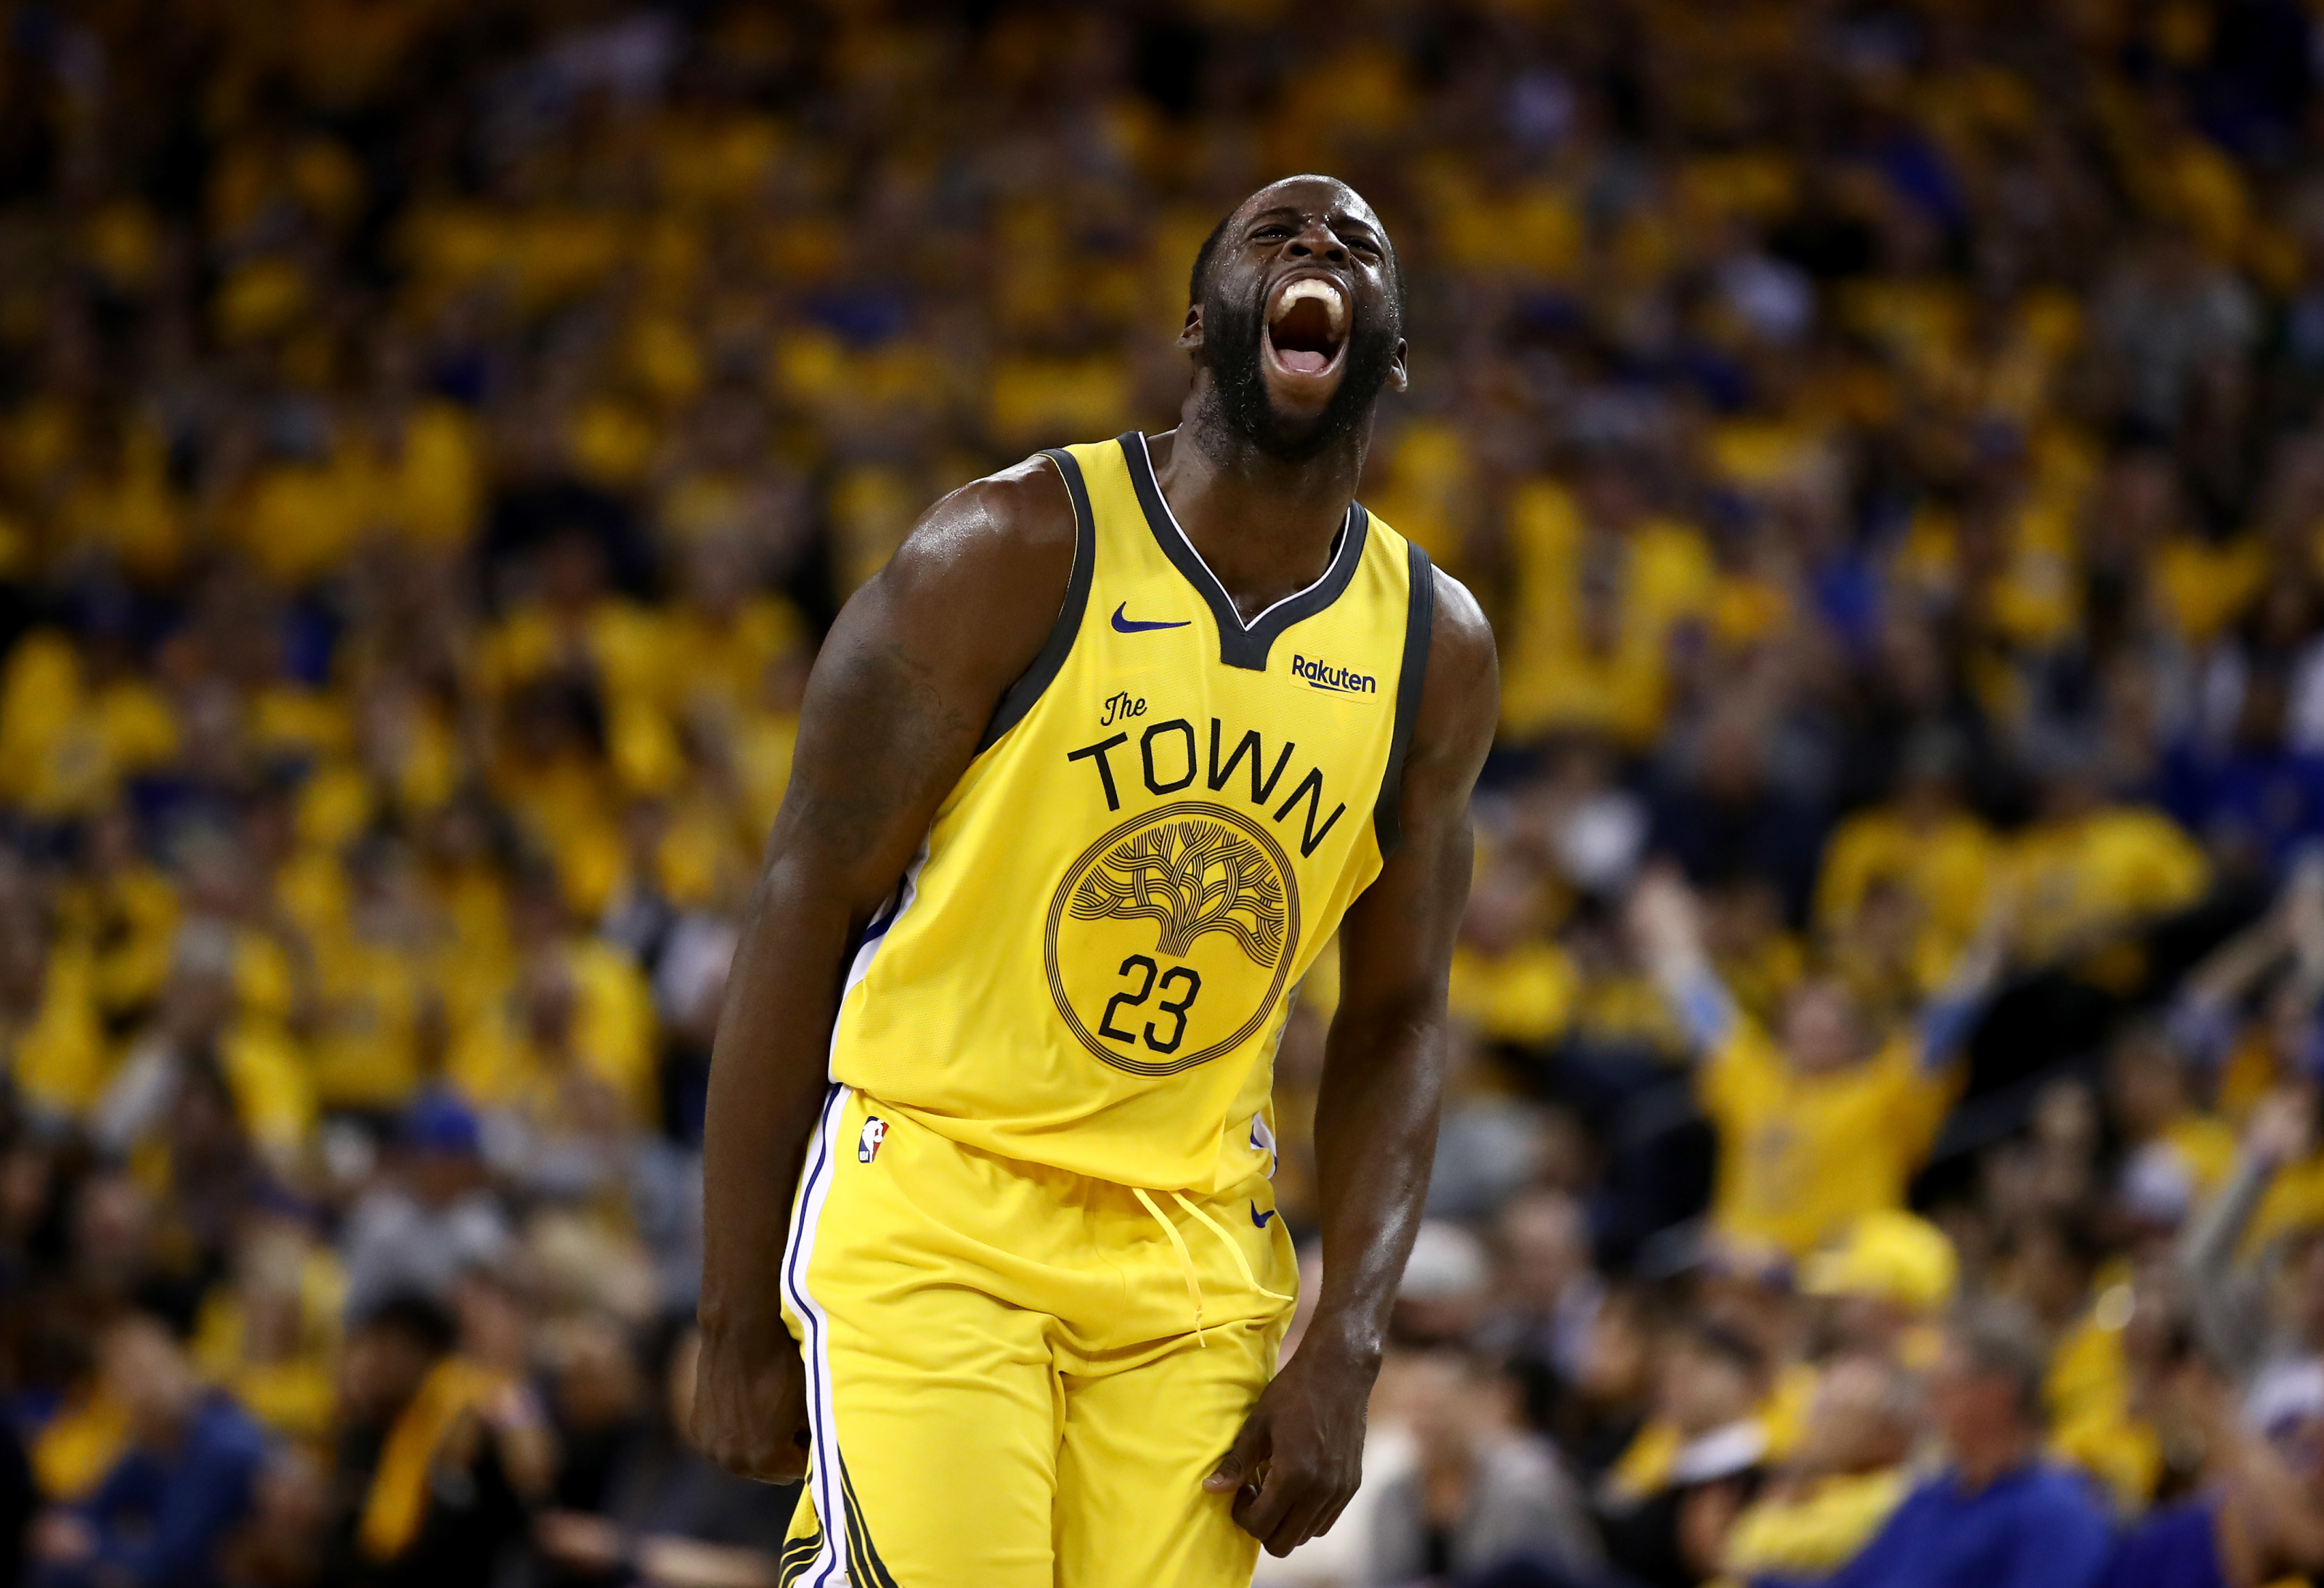 draymond green: Draymond Green signs four-year contract with